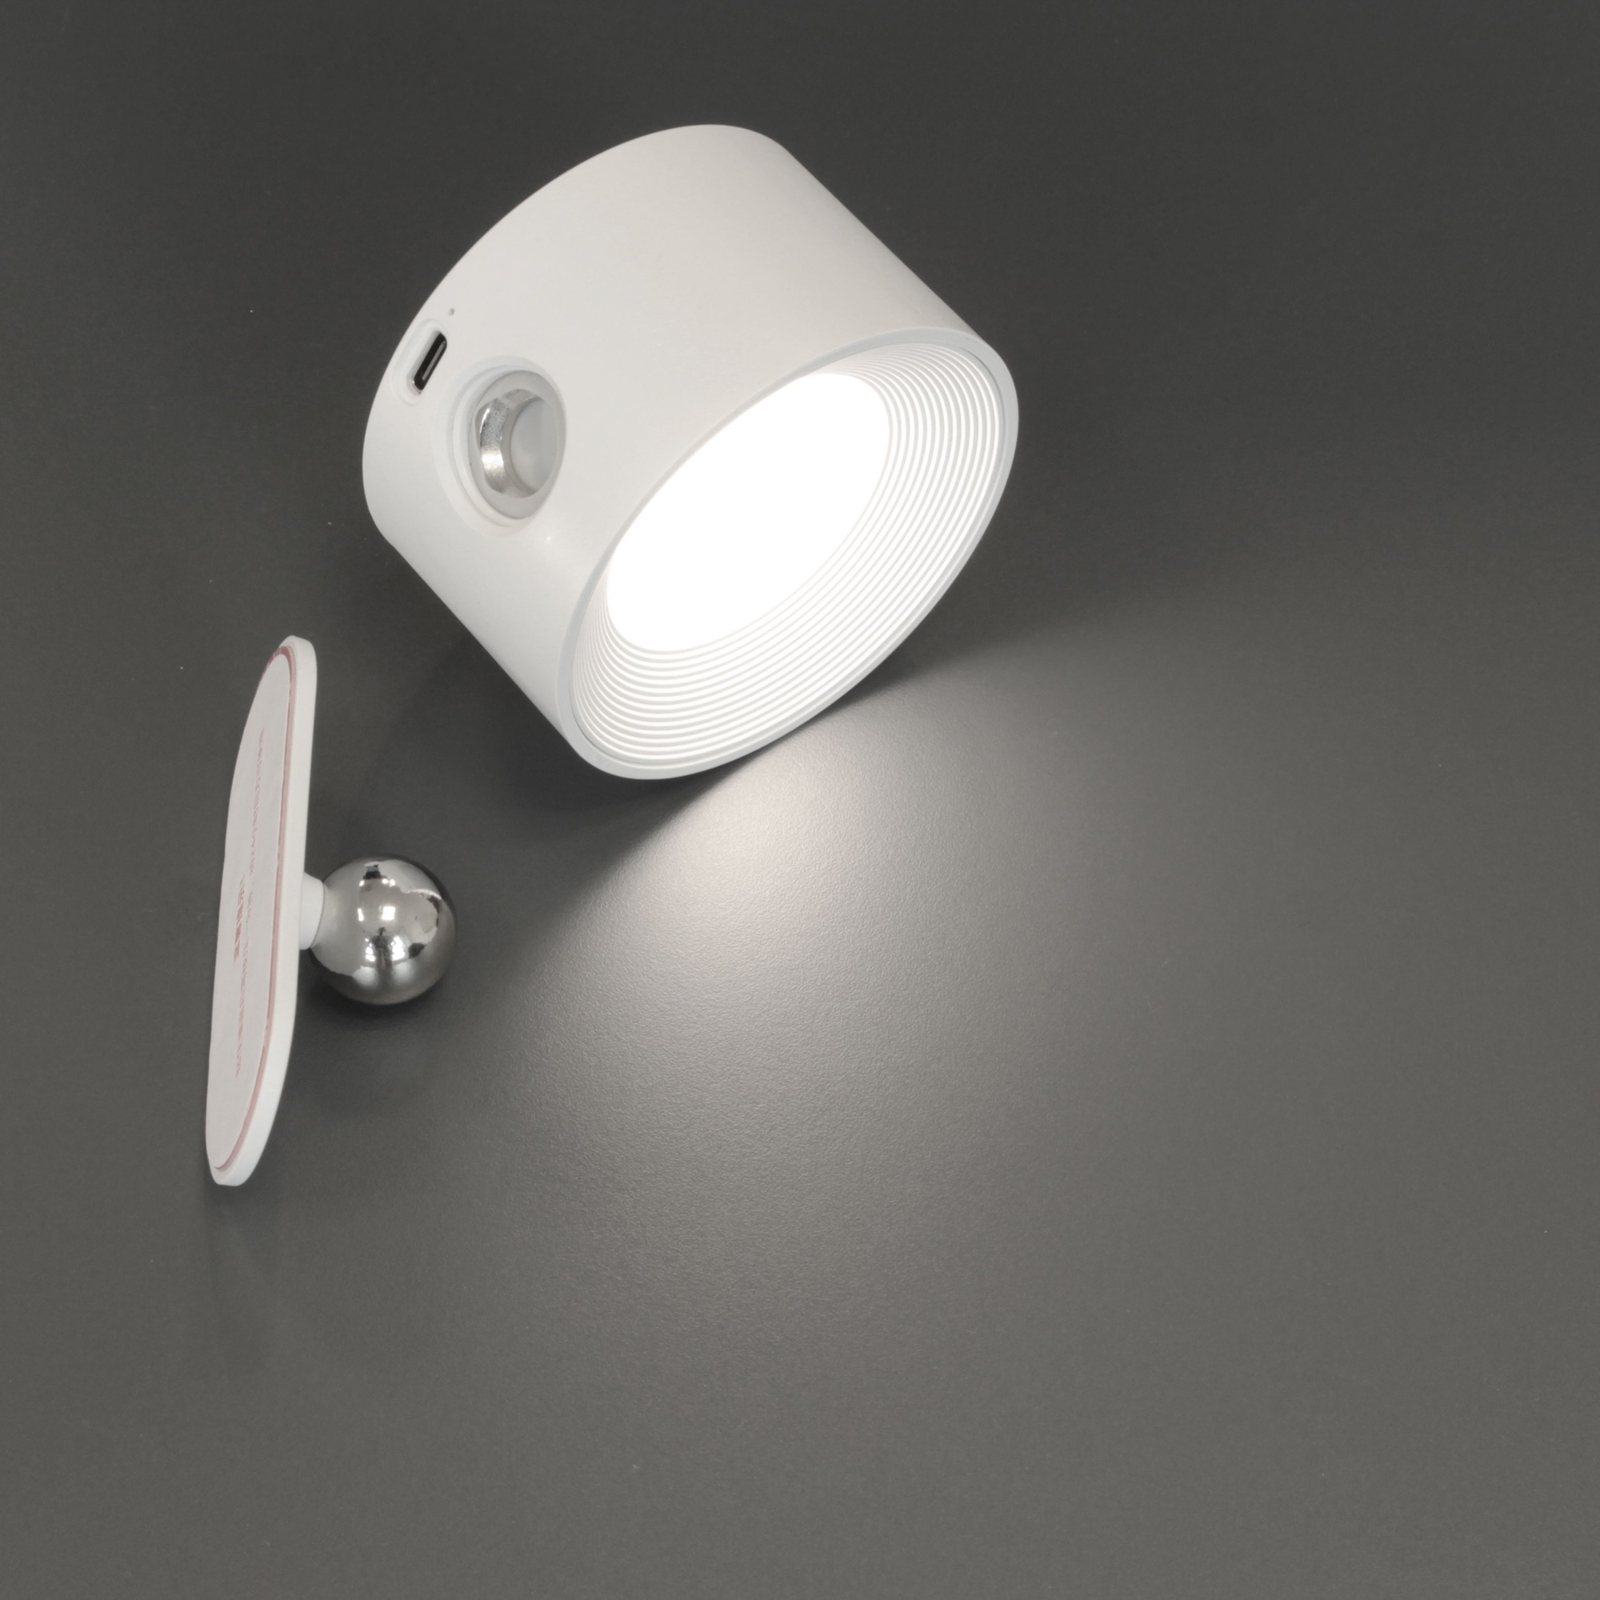 LED wall light Magnetics, white, CCT, with magnet